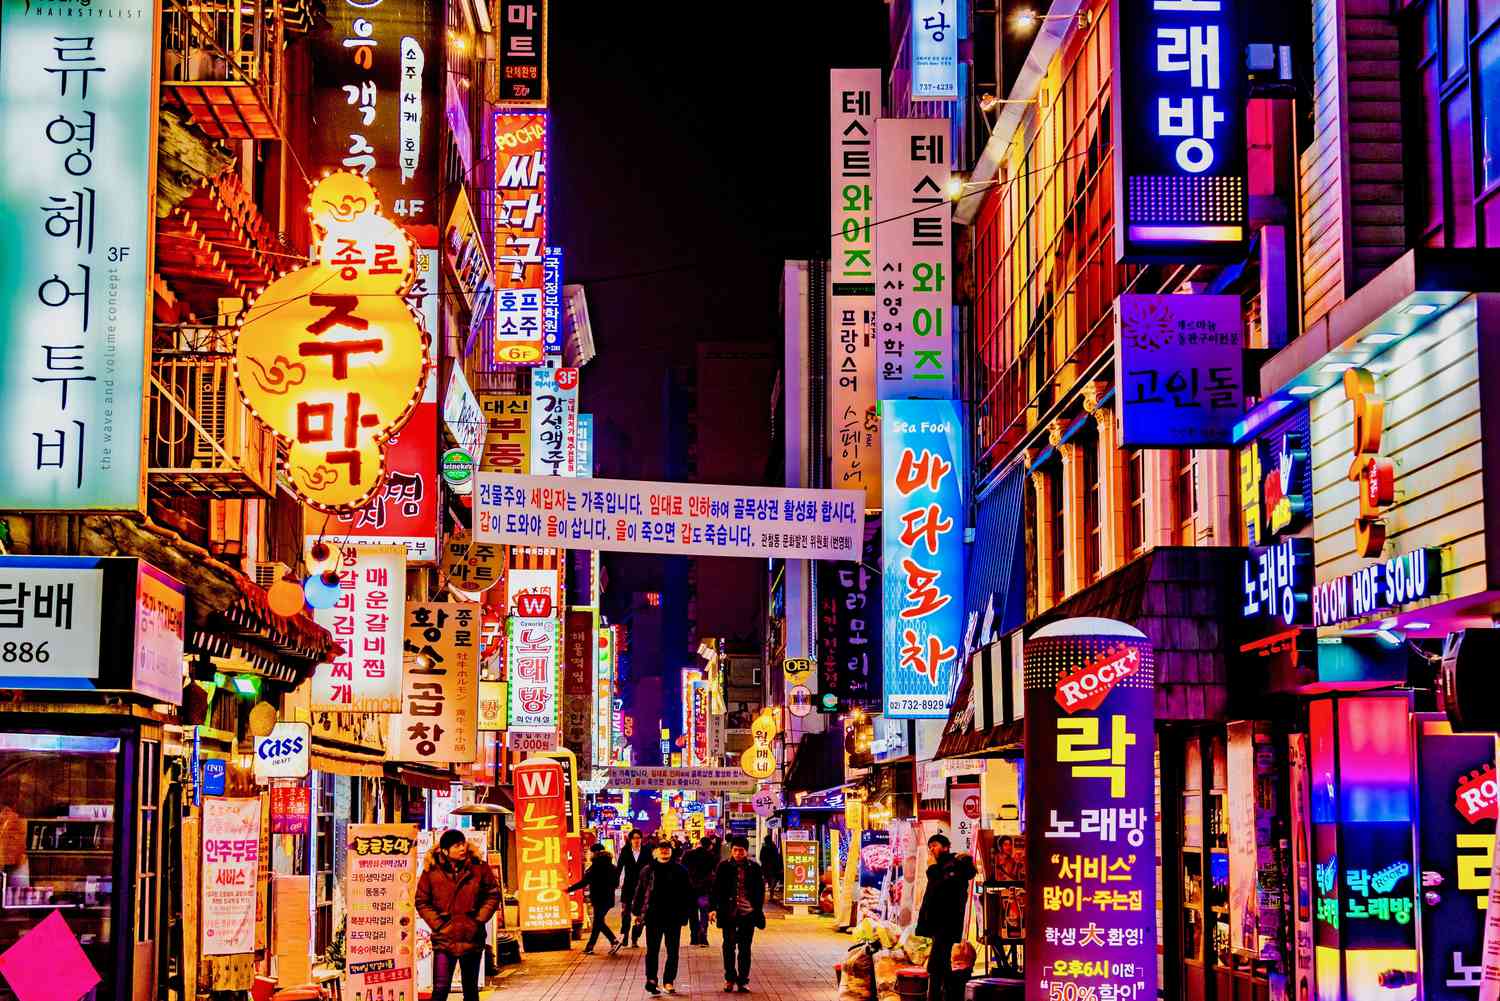 The bustling streets of Seoul is known for their bright neon lights